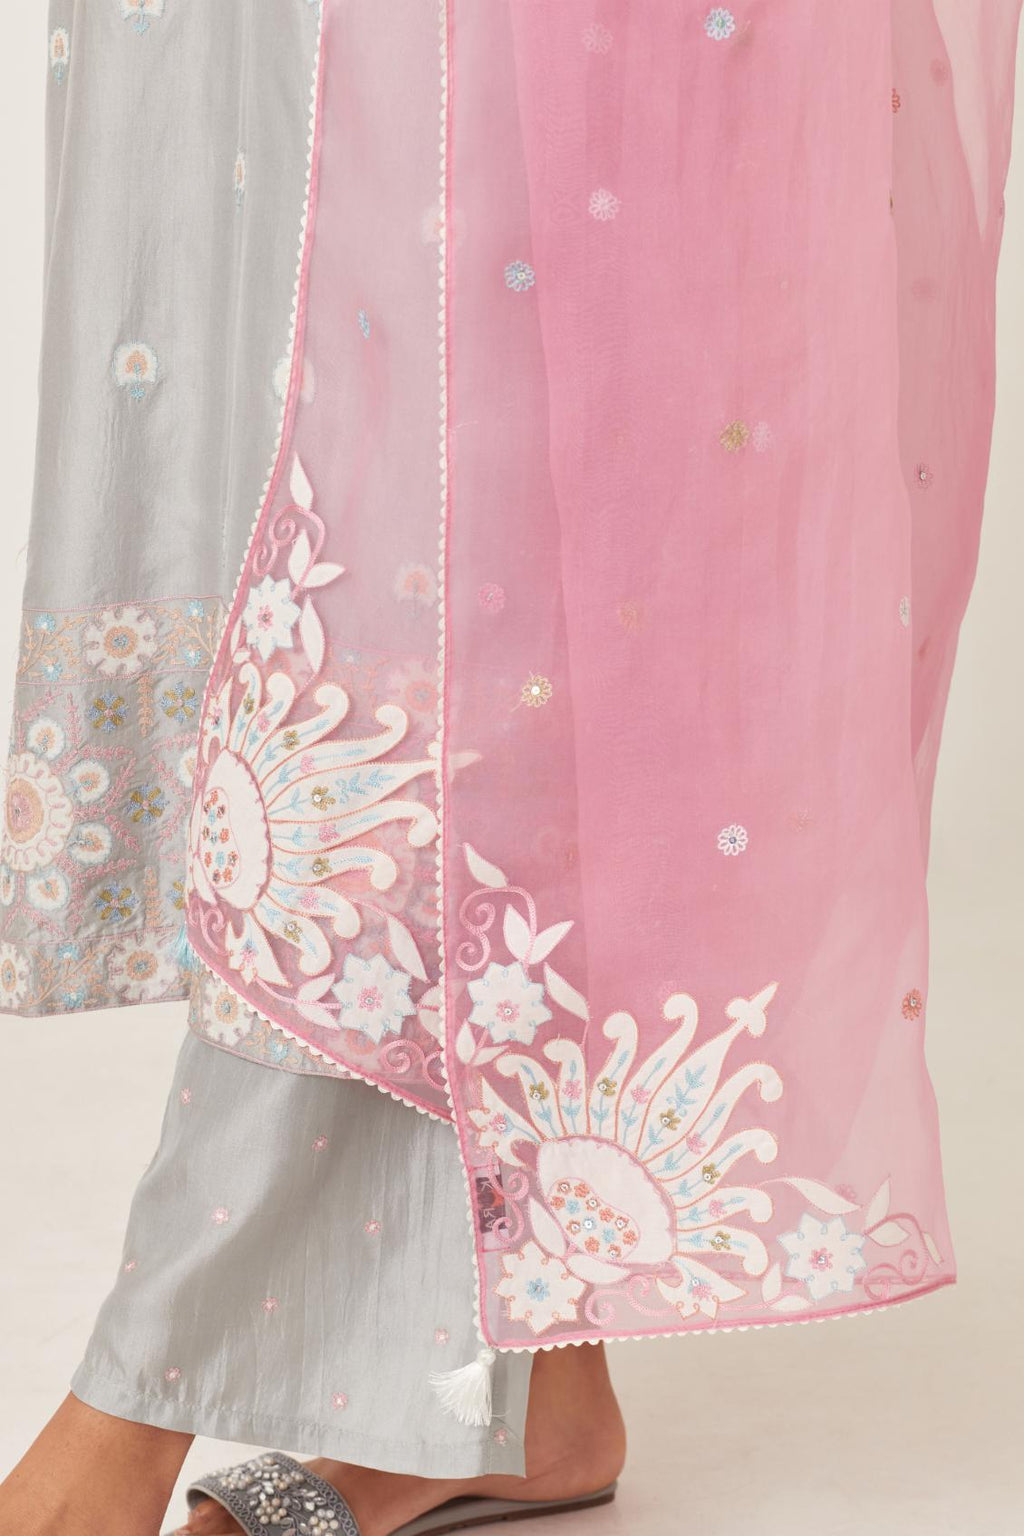 Blue silk kurta set with multi-colored bold appliqué, bootas at borders and aari threadwork, highlighted with sequins.